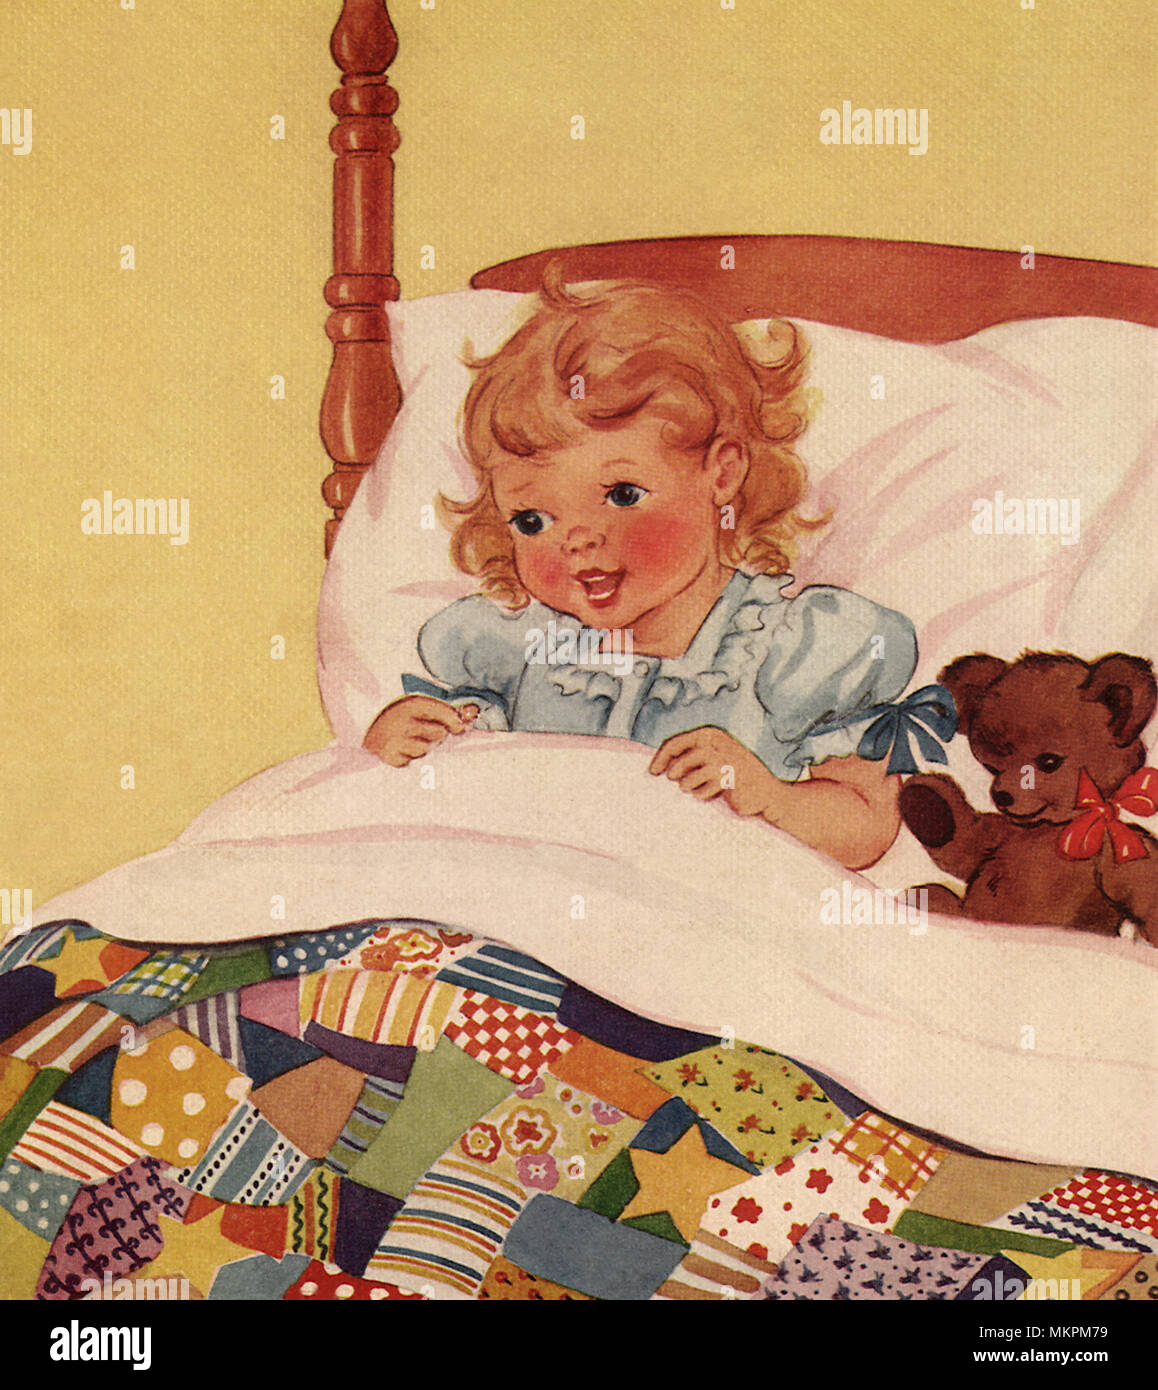 Girl tucked in Bed with Teddy Bear Stock Photo